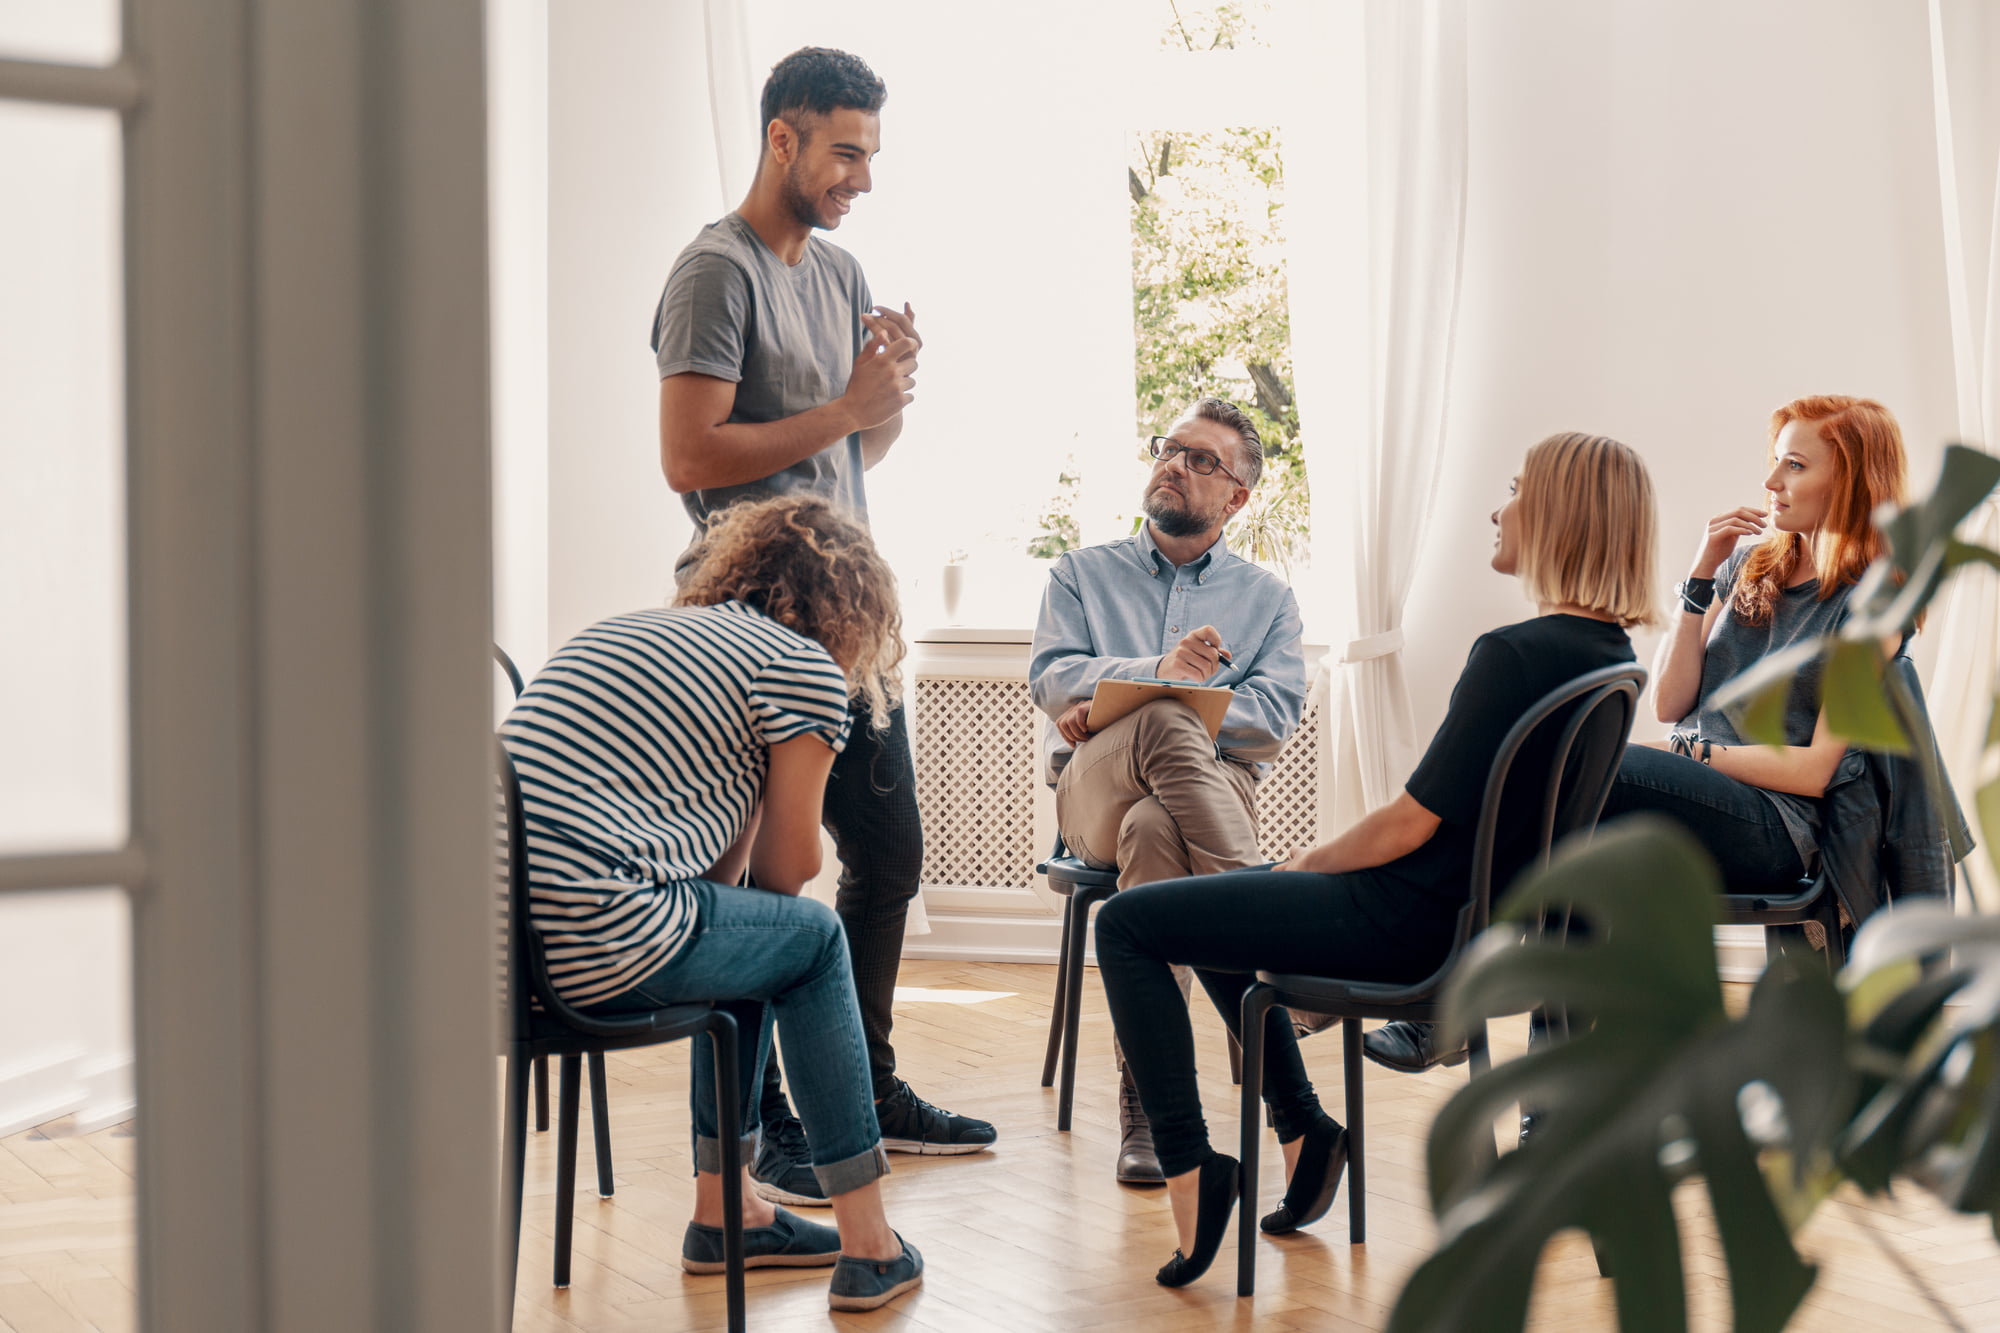 Finding the right facility for treating your addiction requires knowing your options. Here is what to know about how to select addiction treatment centers.